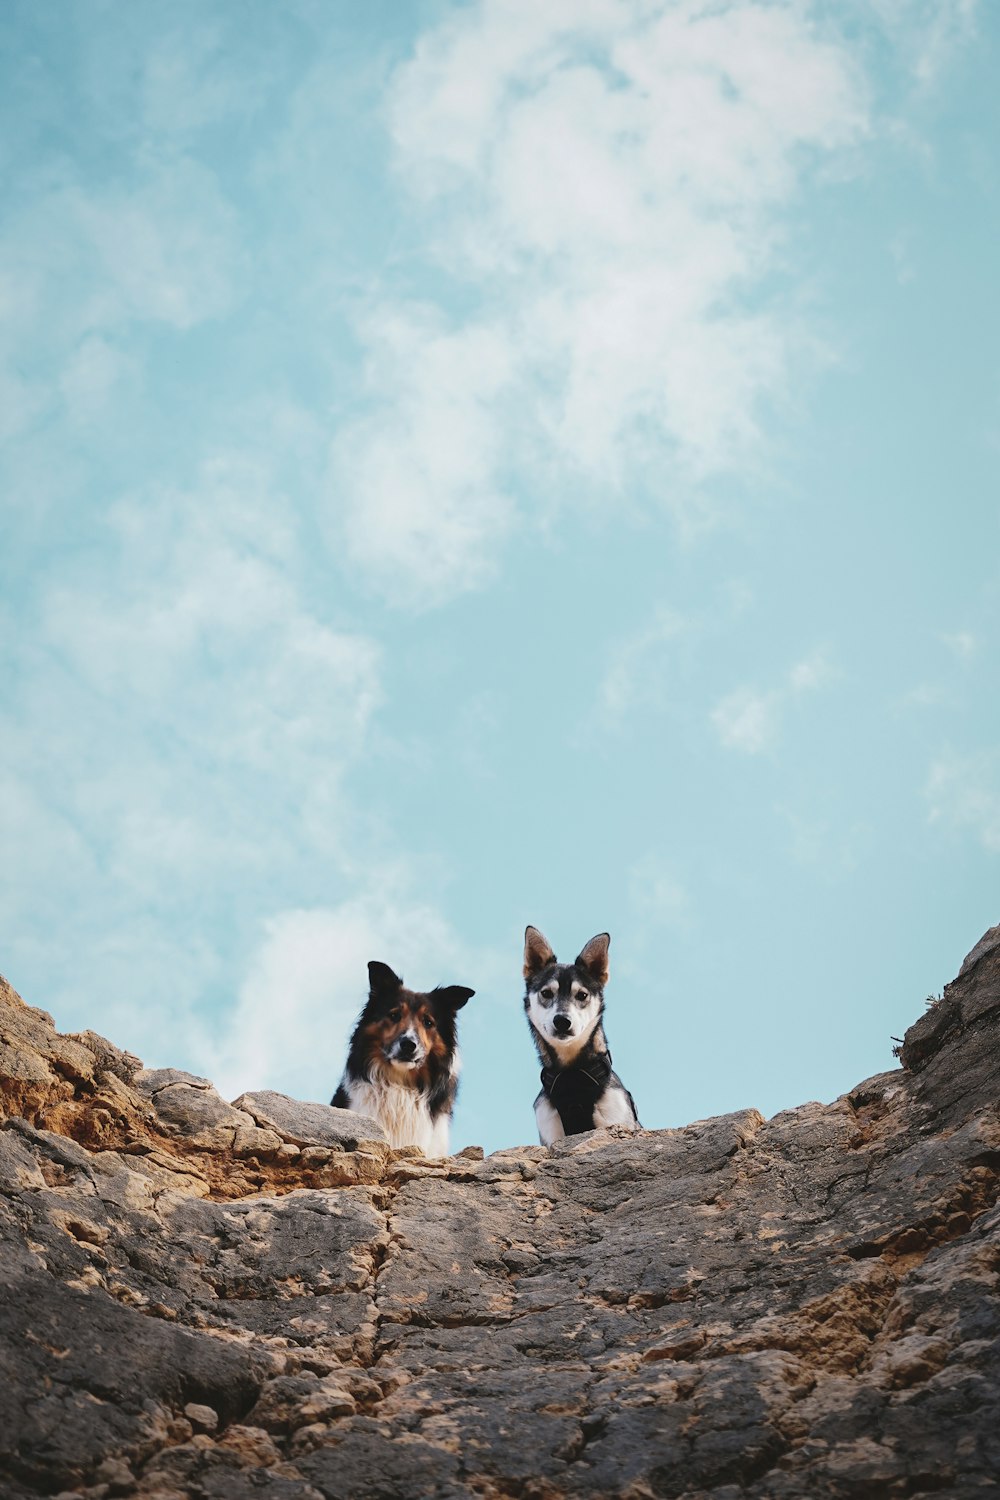 two dogs are sitting on a rock ledge